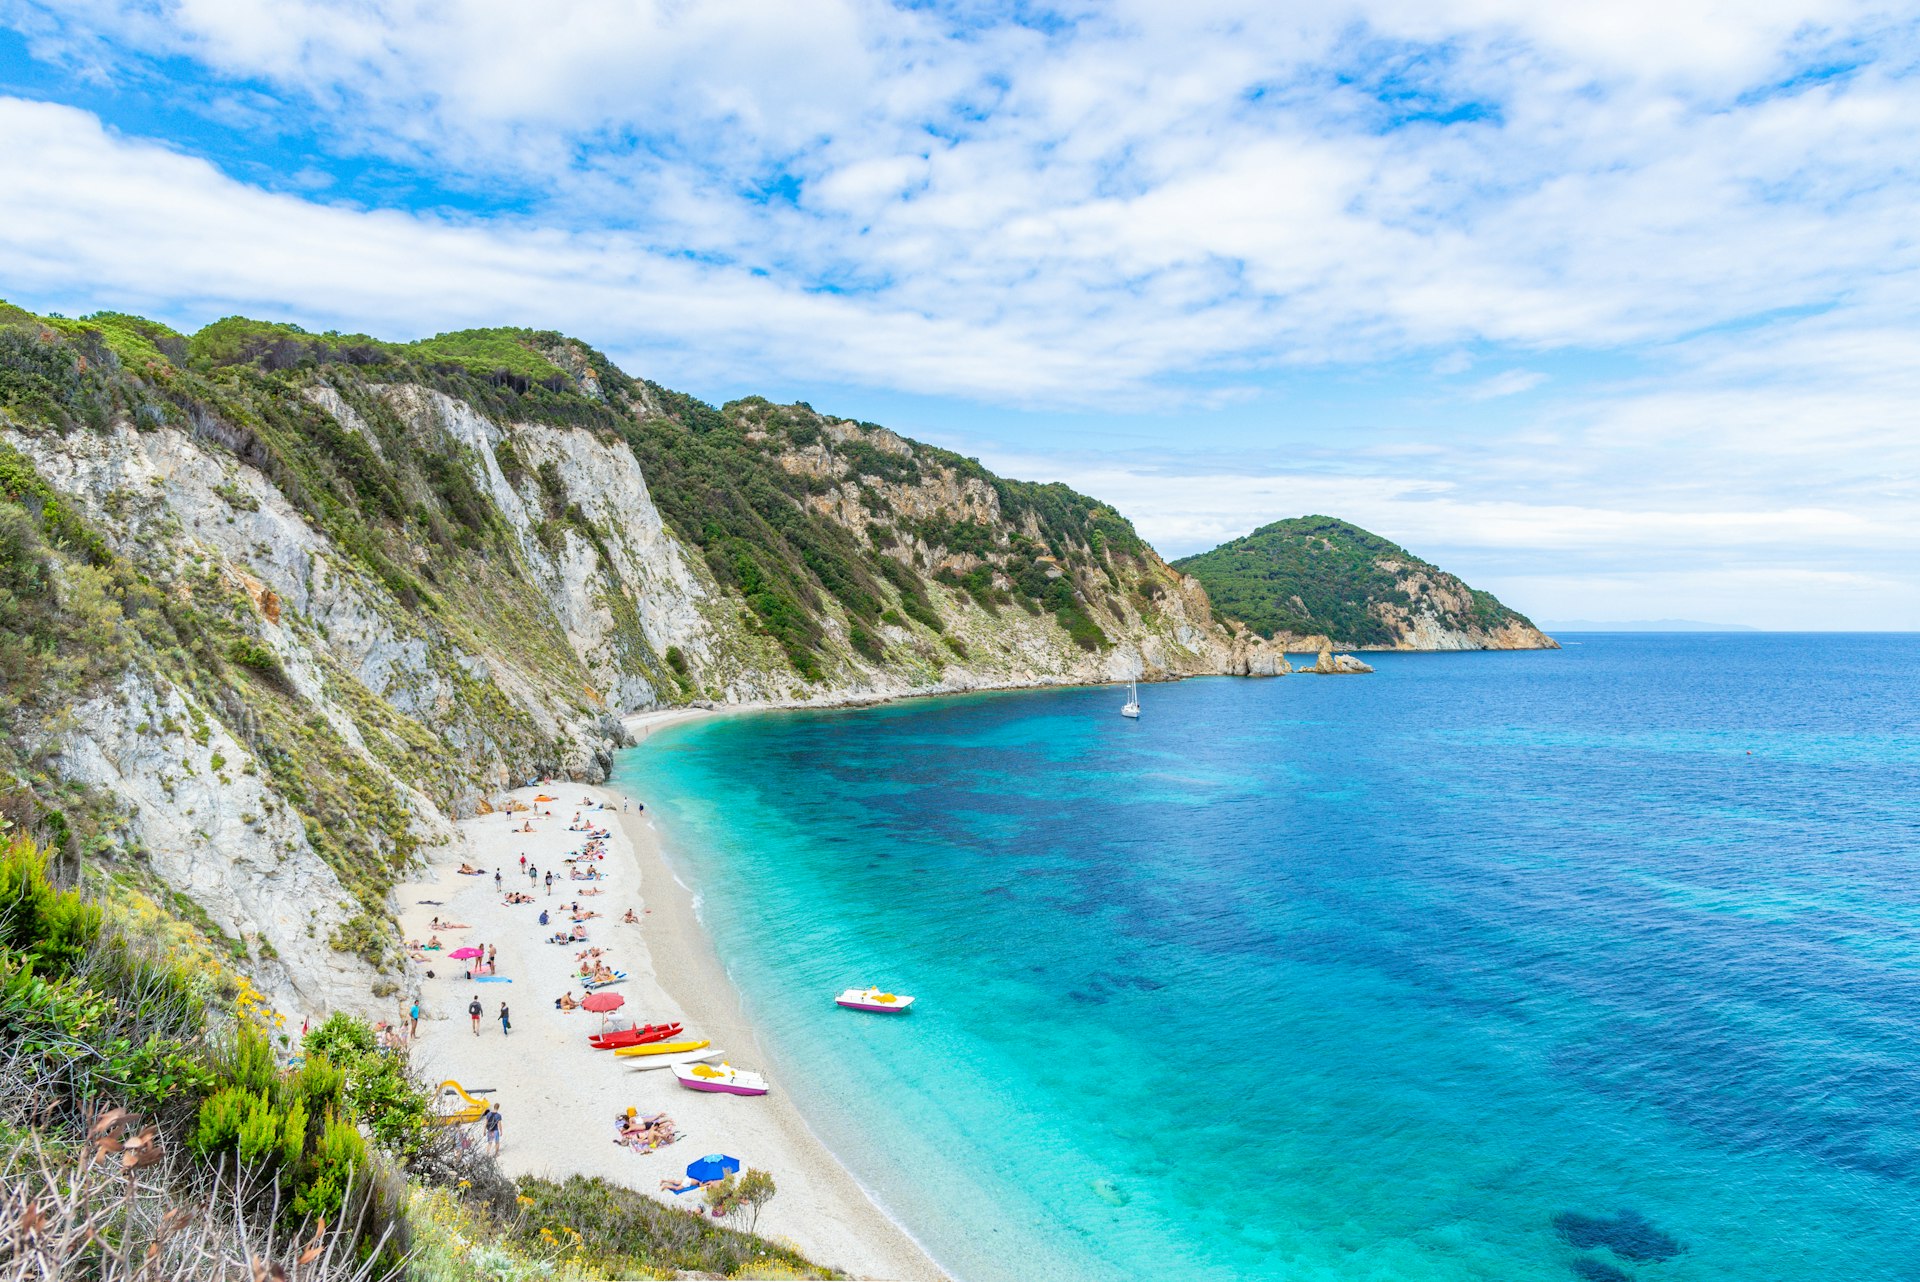 High-angle view of Sansone Beach on Elba Island. The beach has white sand and turquoise waters, and is backed by a large cliff.